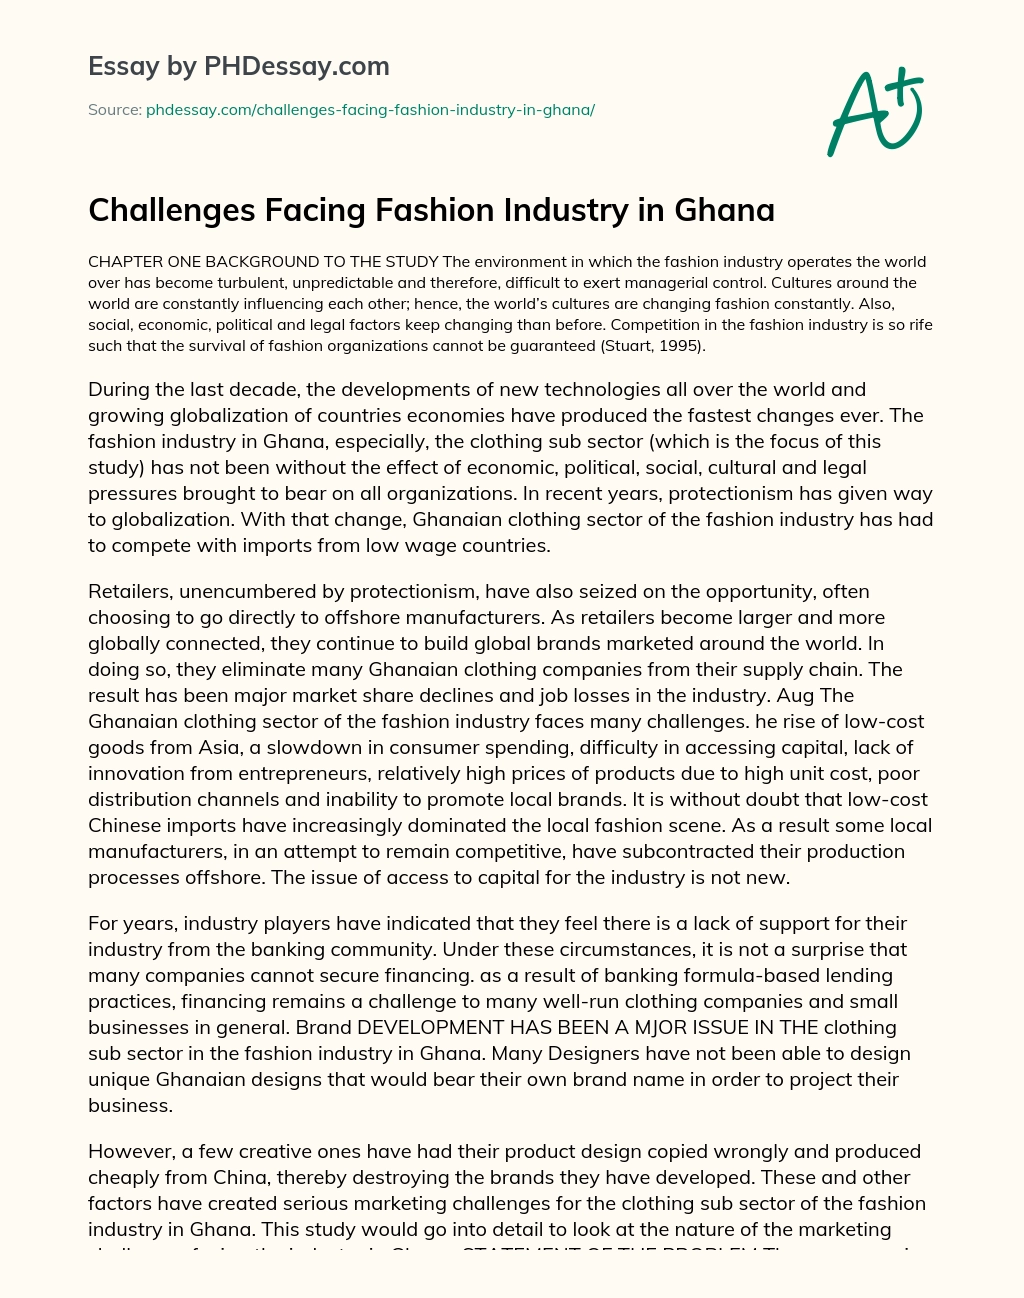 Challenges Facing Fashion Industry in Ghana essay